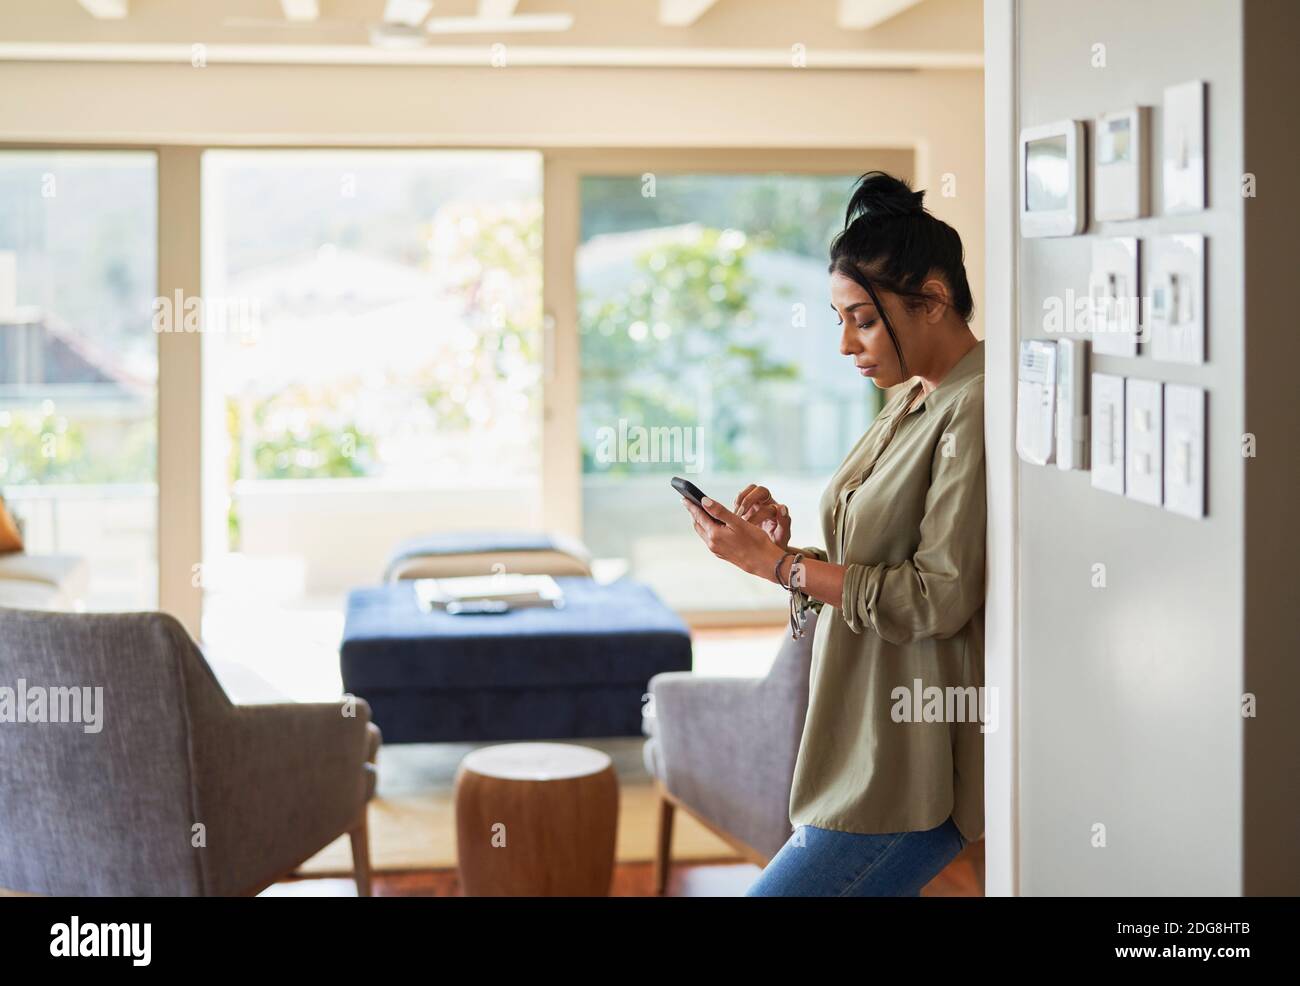 Woman using smart phone by home automation controls Stock Photo